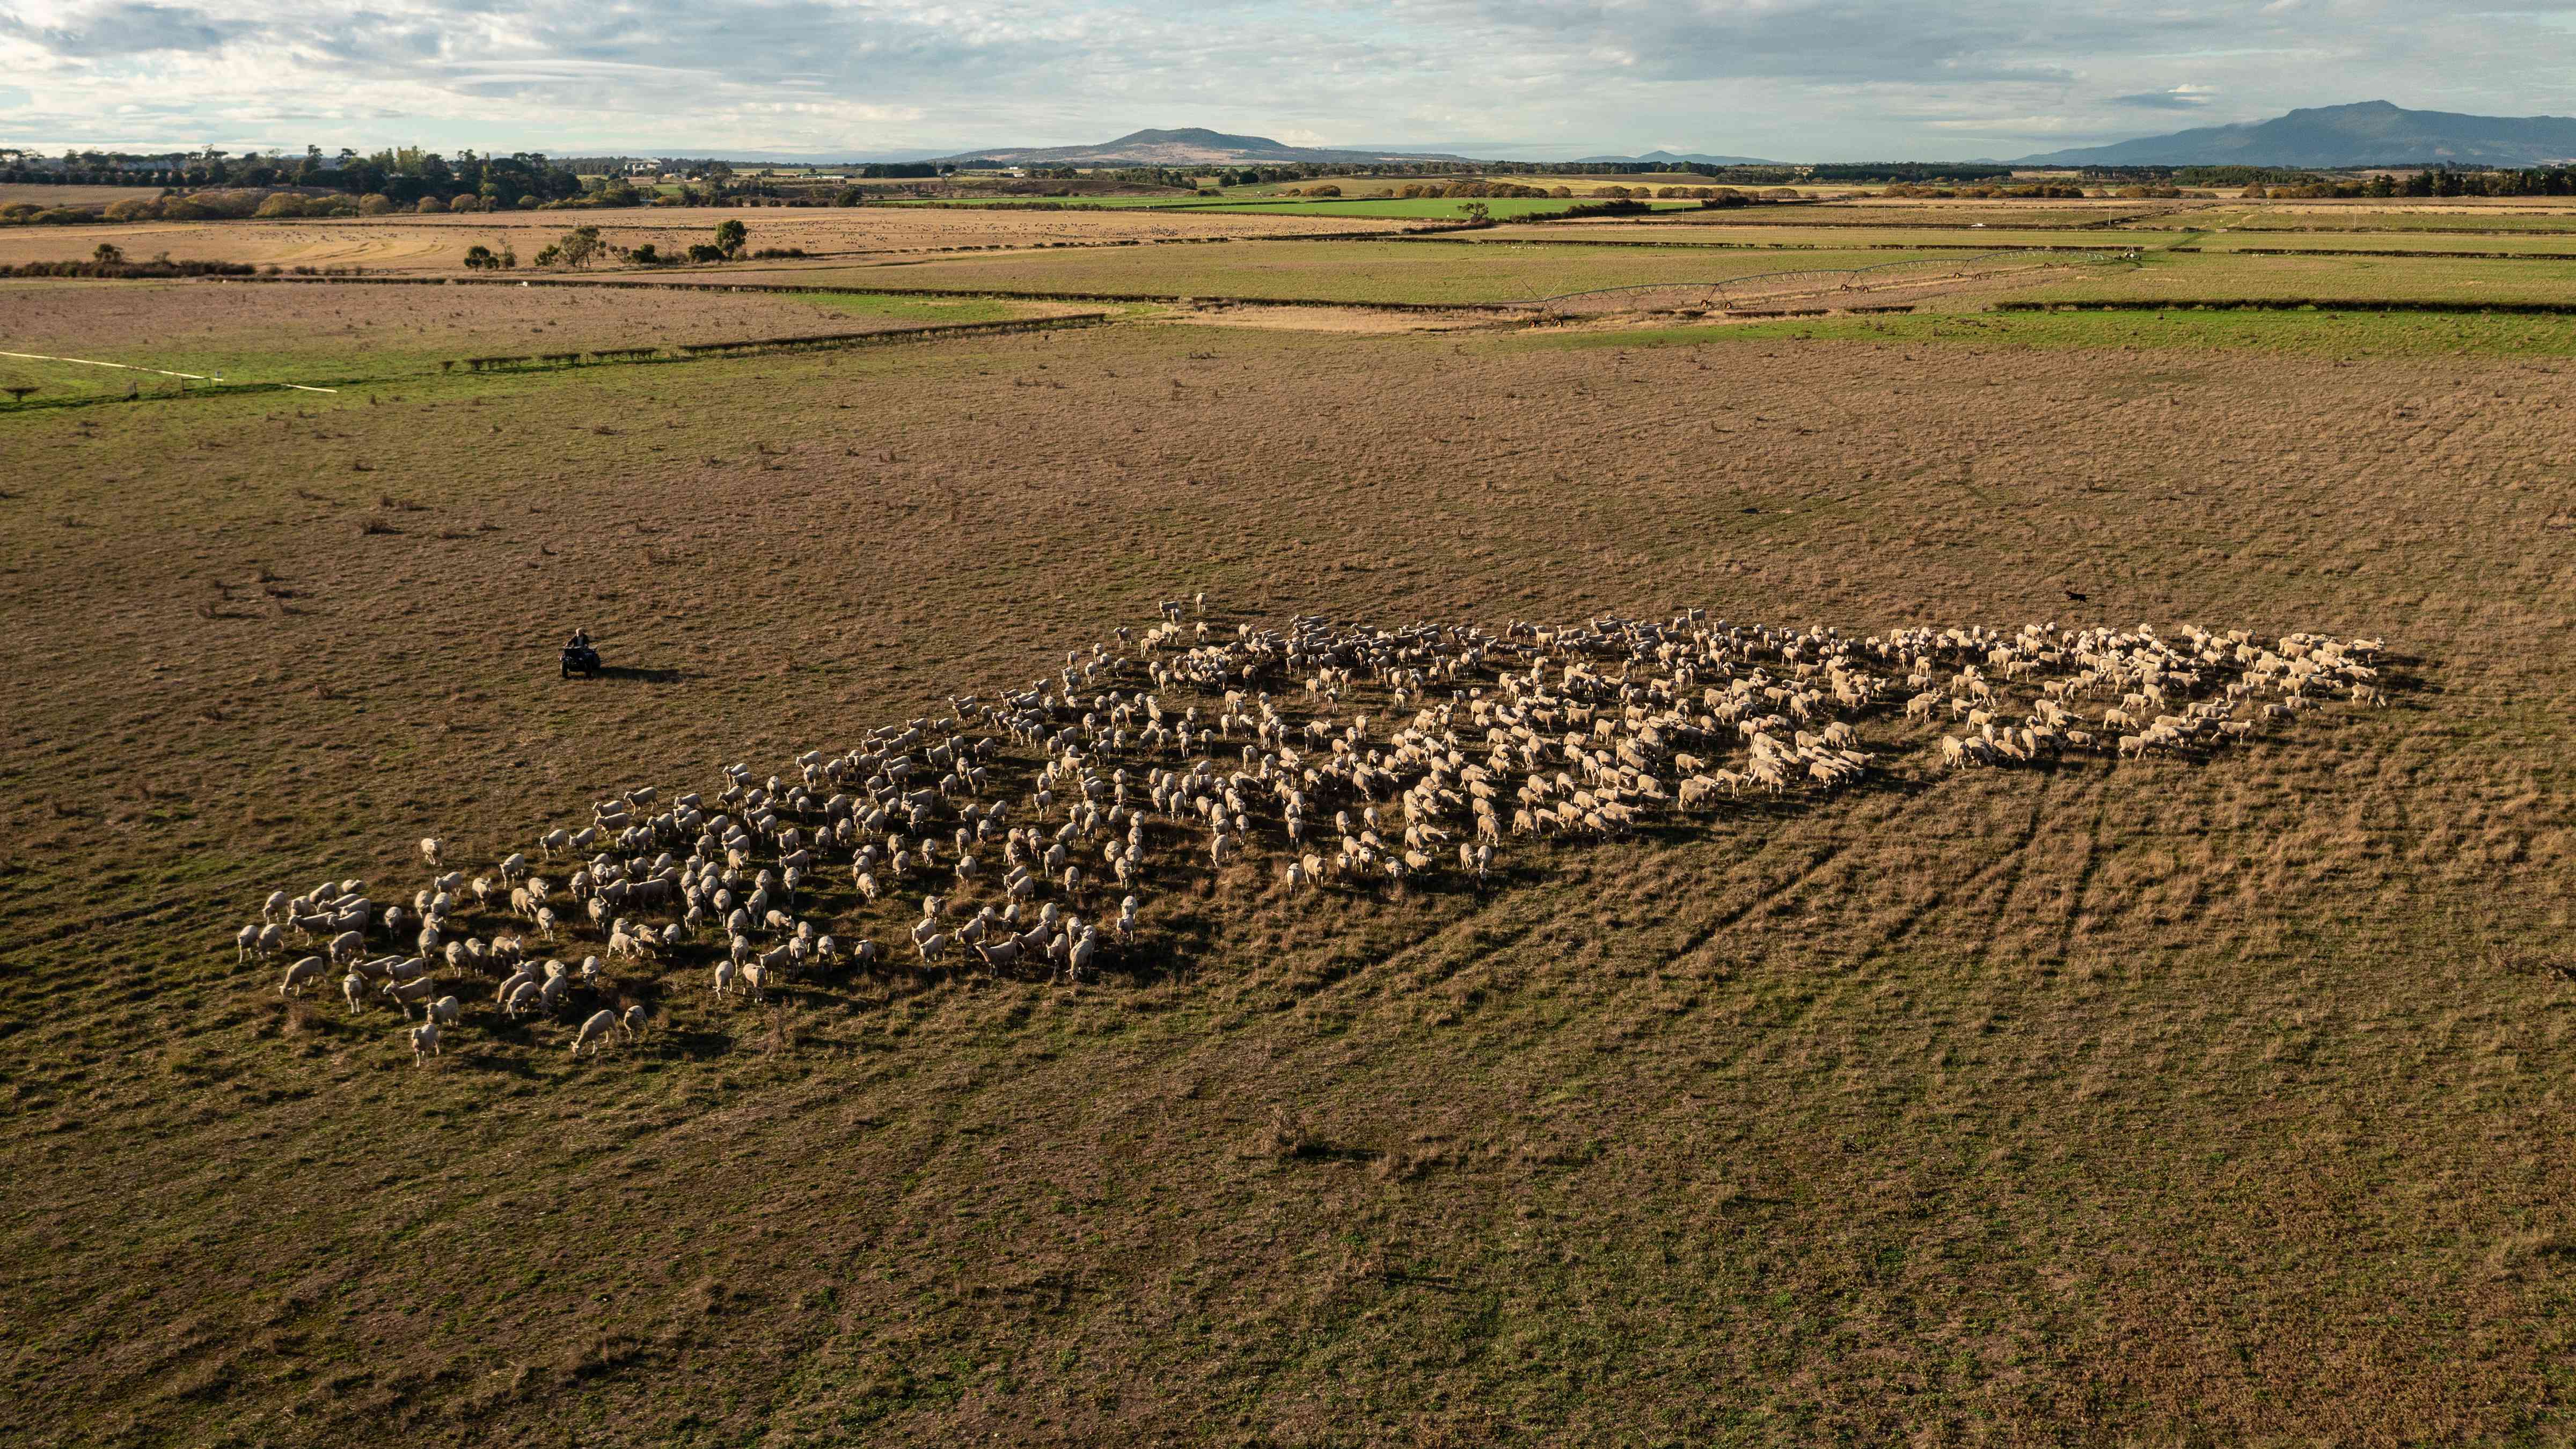 Close aerial shot of Brickendon field with a flock of sheep in the middle and a person riding a four wheel motor bike to the left of the sheep. Photo: Kate von Stieglitz / Tourism Australia.